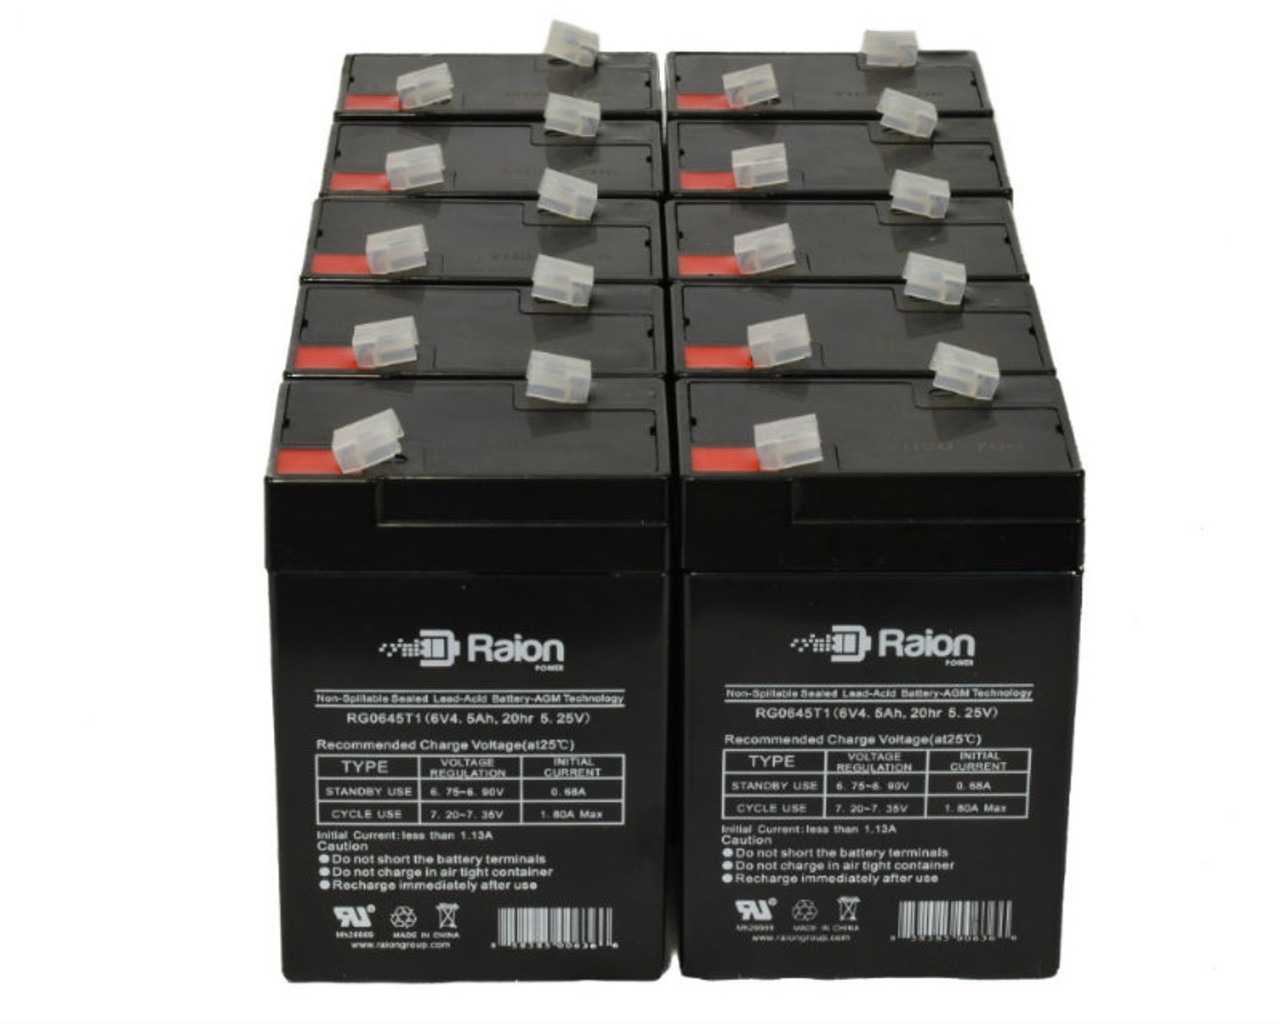 Raion Power 6 Volt 4.5Ah RG0645T1 Replacement Battery for GP GB4.5-6 - 10 Pack